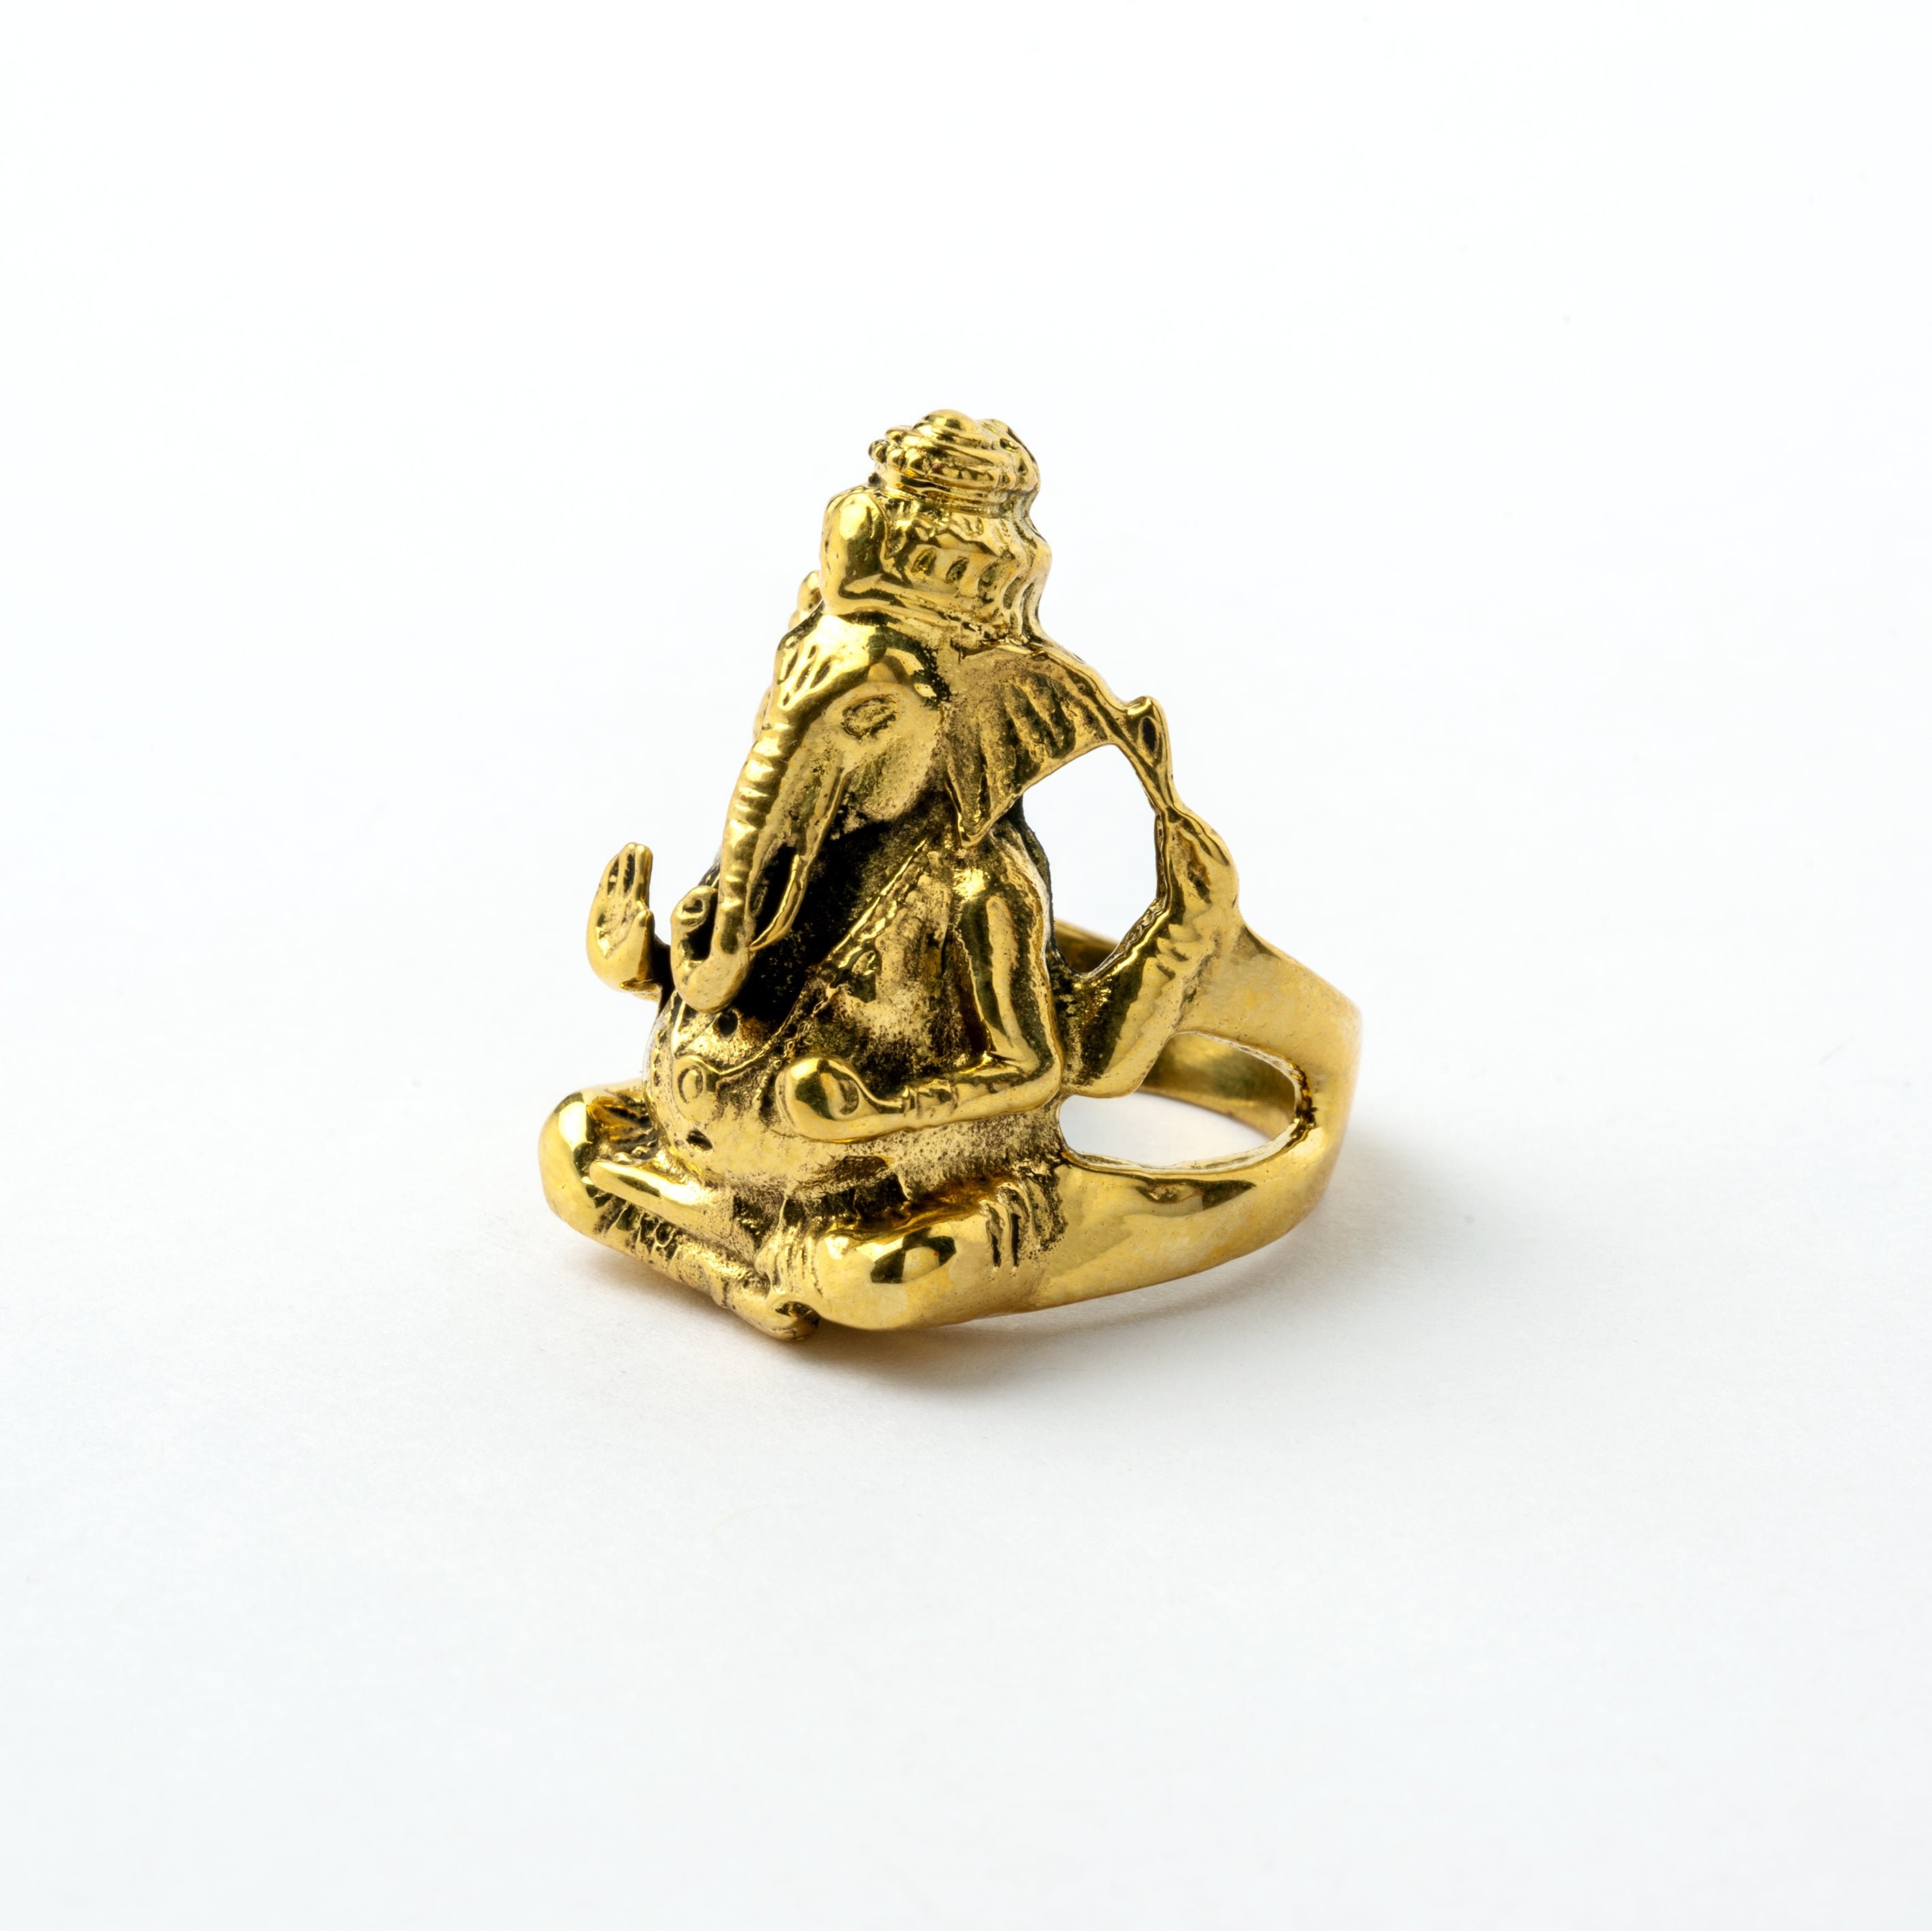 Buy 22Kt Lord Ganesha Gifting Gold Ring For Men 97VM6383 Online from  Vaibhav Jewellers